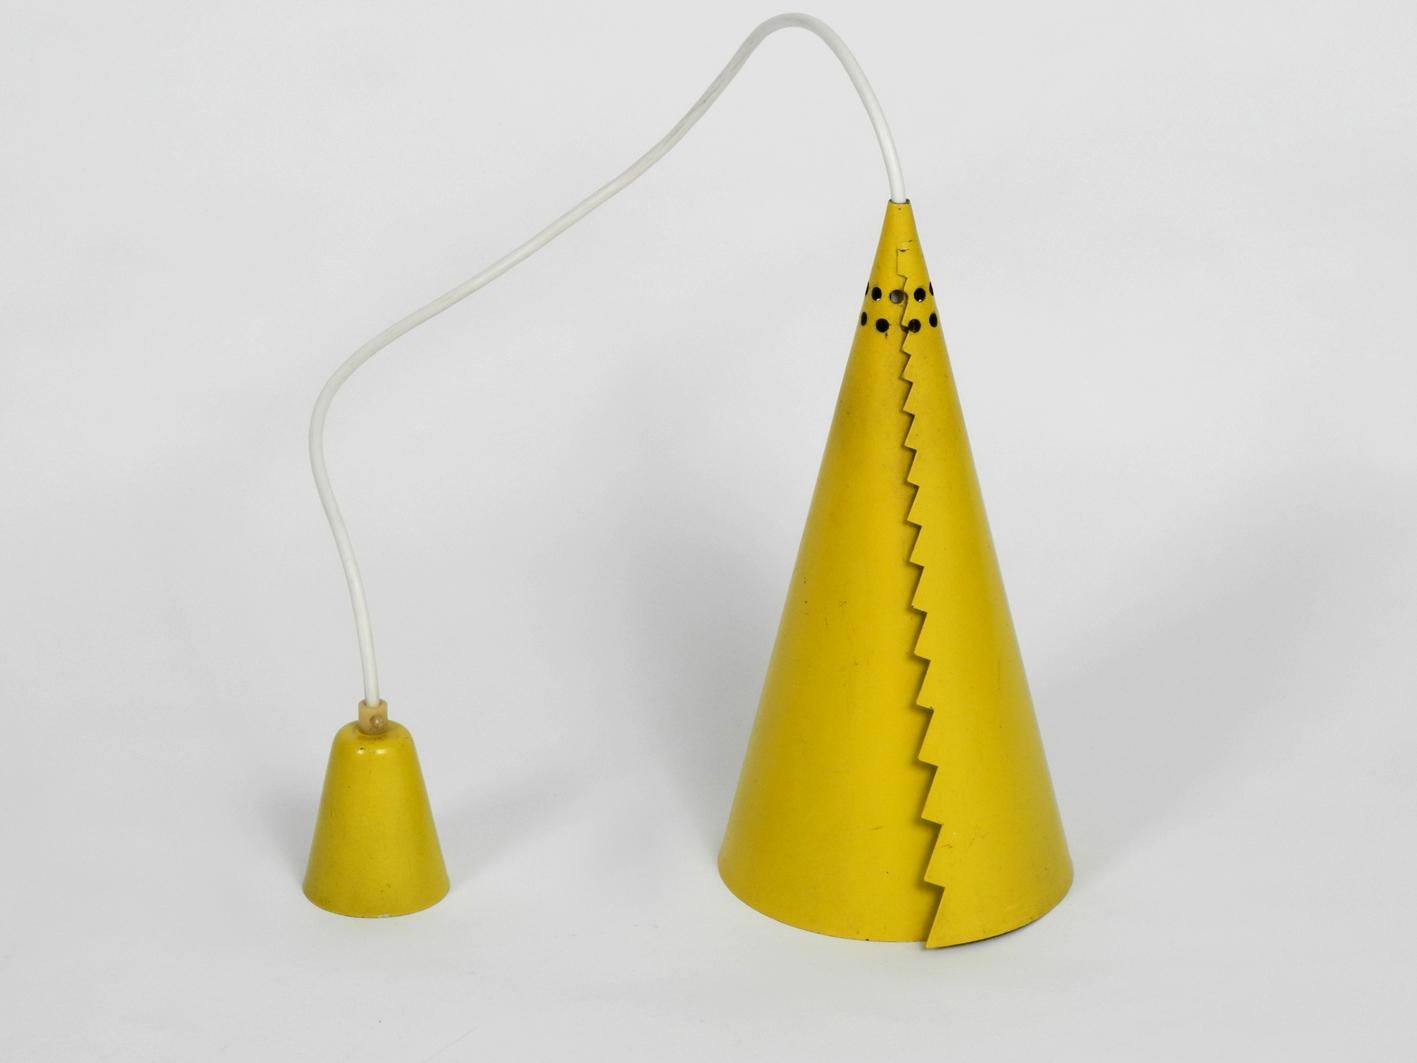 Rare Mid-Century Modern Cone Shaped Pendant Lamp Made of Sheet Steel in Yellow For Sale 1